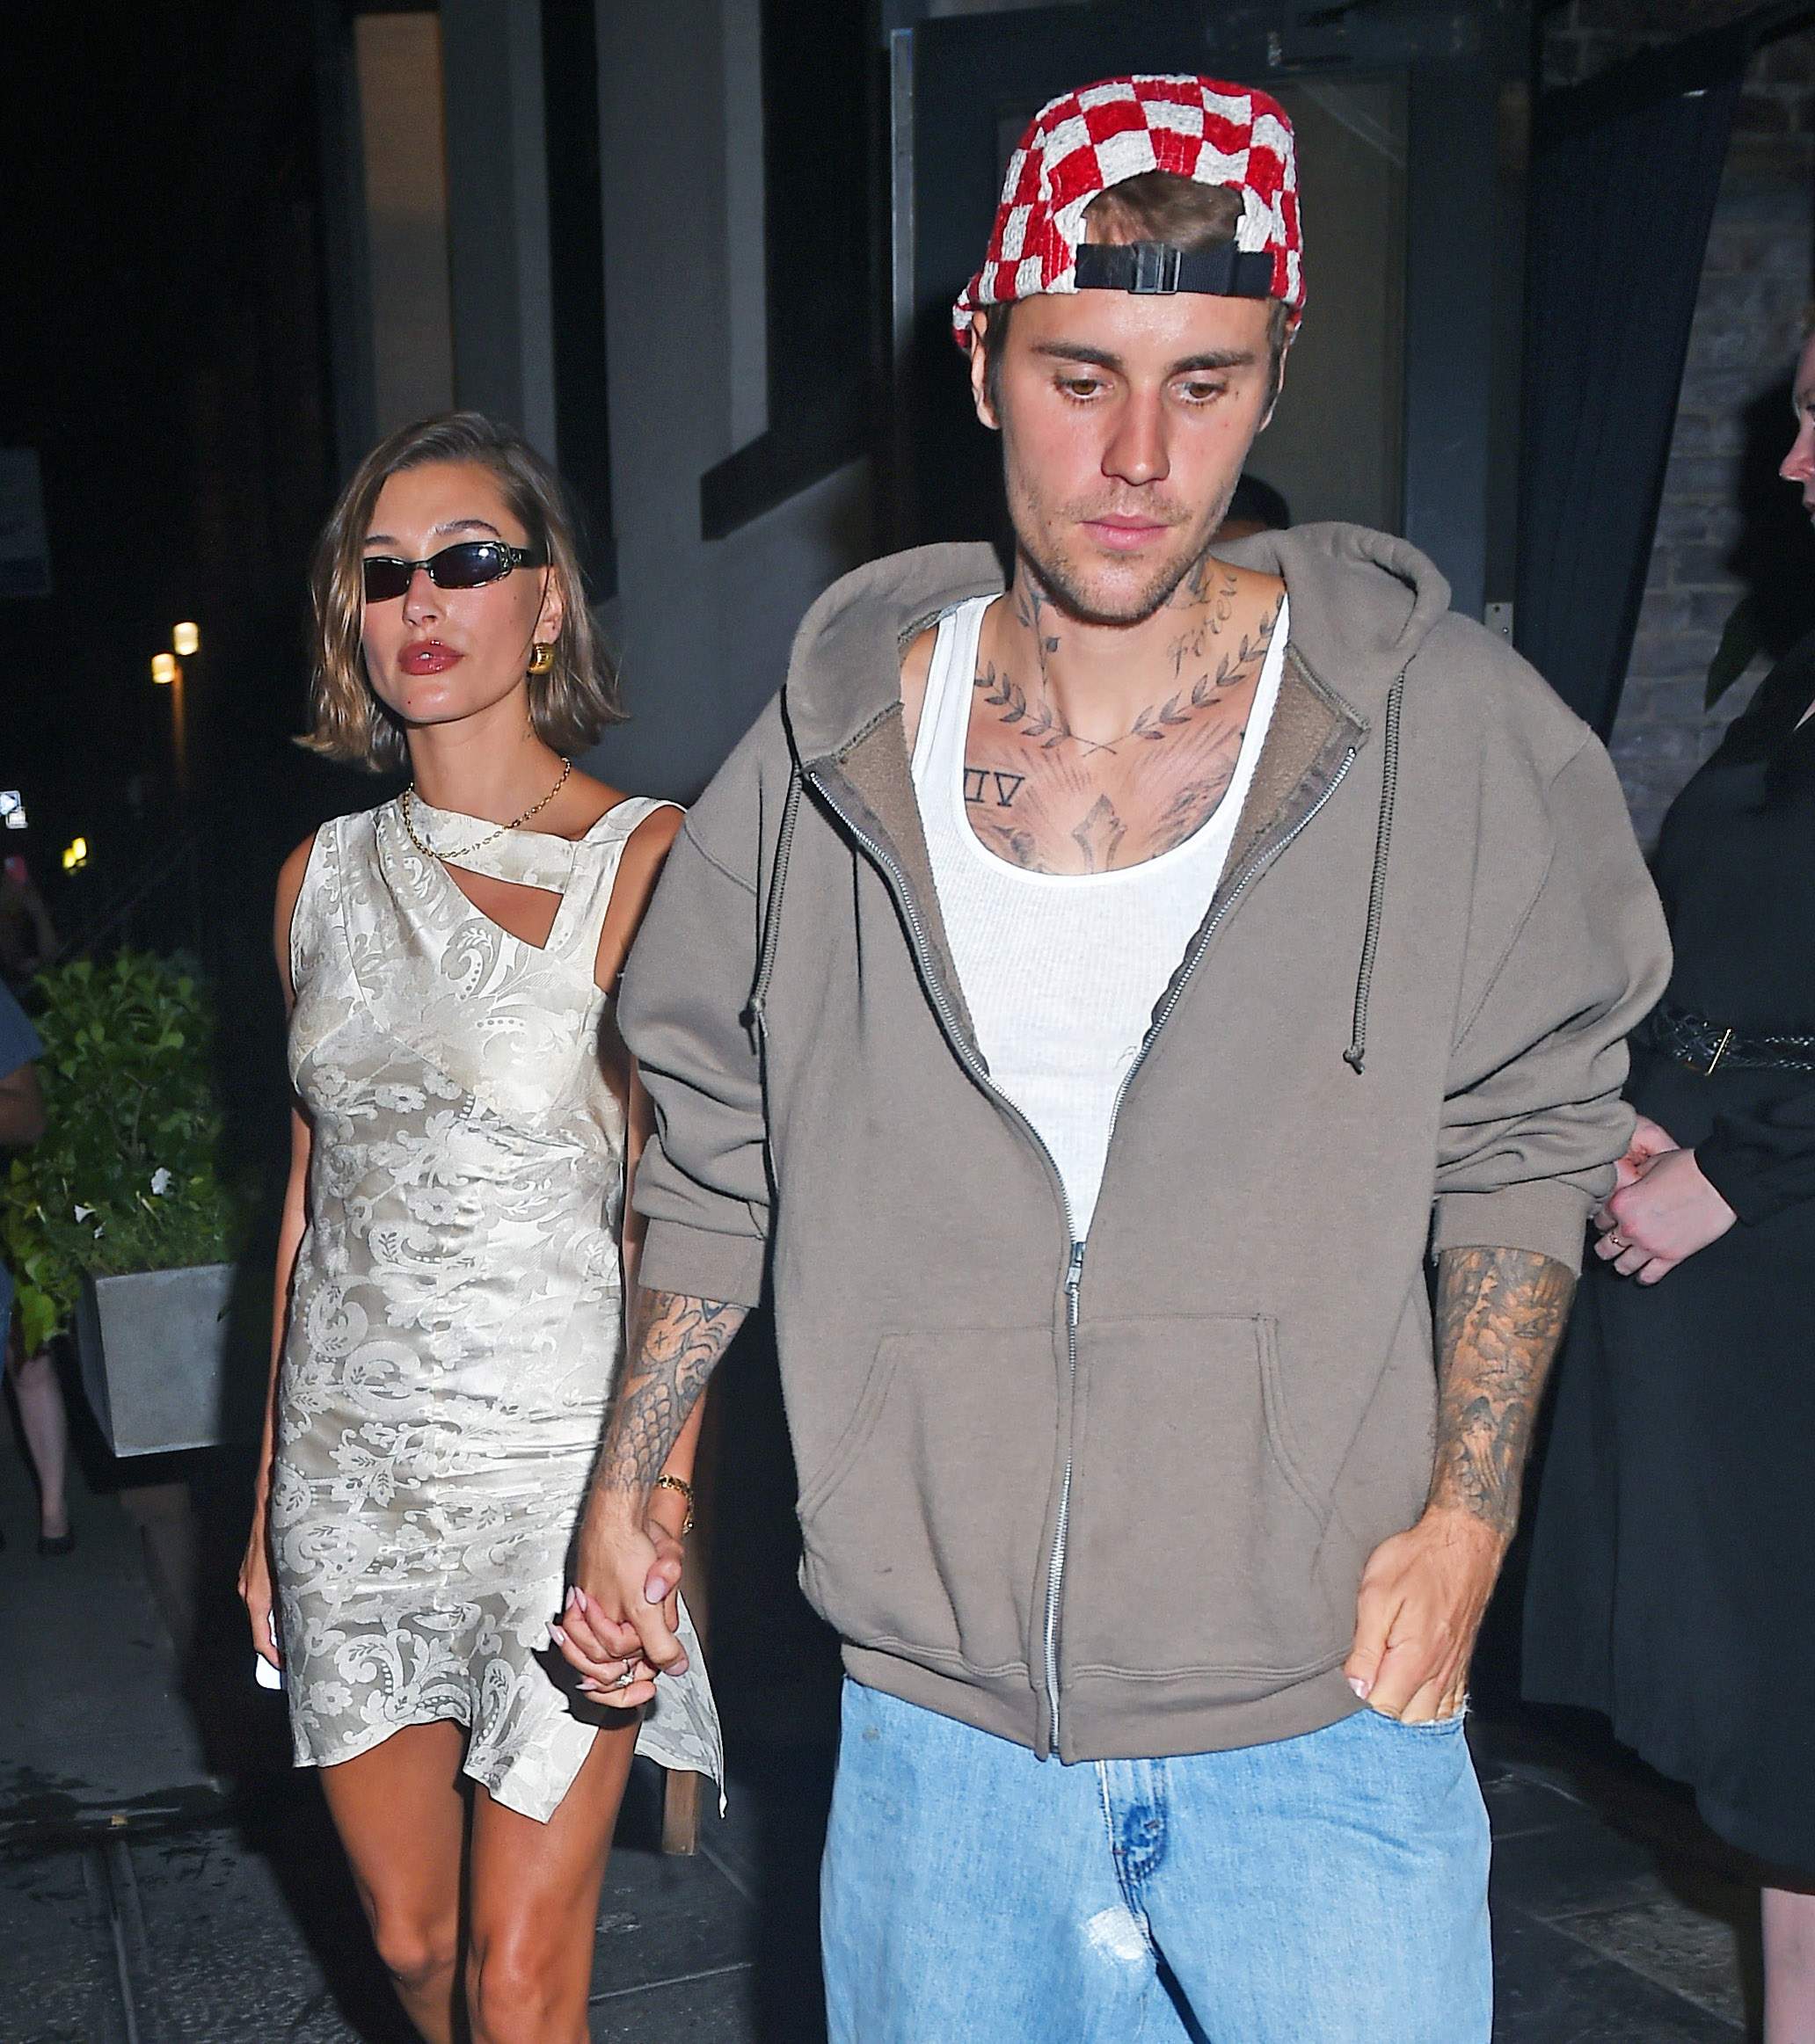 In July 2023, the married couple were photographed leaving a restaurant in New York City